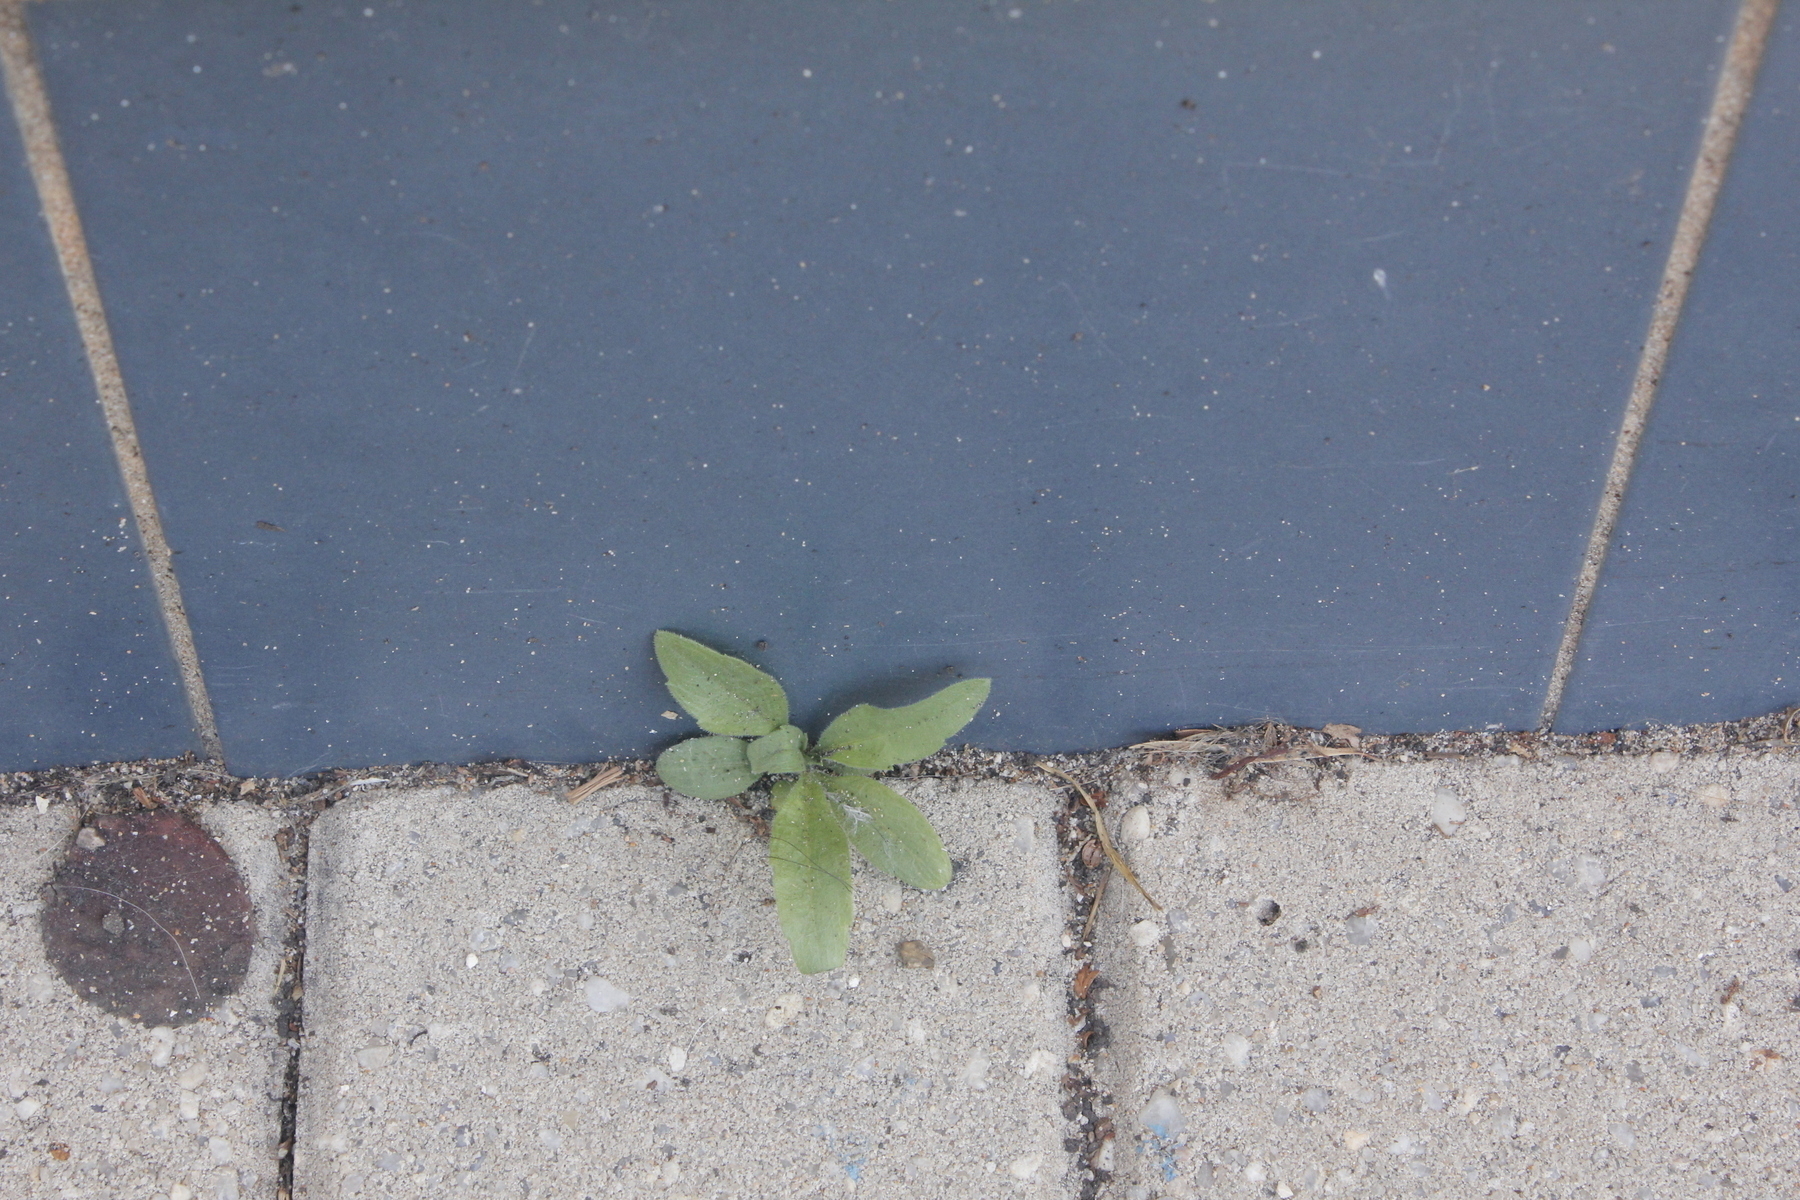 In the detritus of a gap where big, vertical blue tiles and flat stone pavers come together, a humble weed is growing. Its six broad, green leaves are spattered with grains of sand and dirt, and variously draped with spider web and loose, dark thread. It has the patience to thrive against the odds.